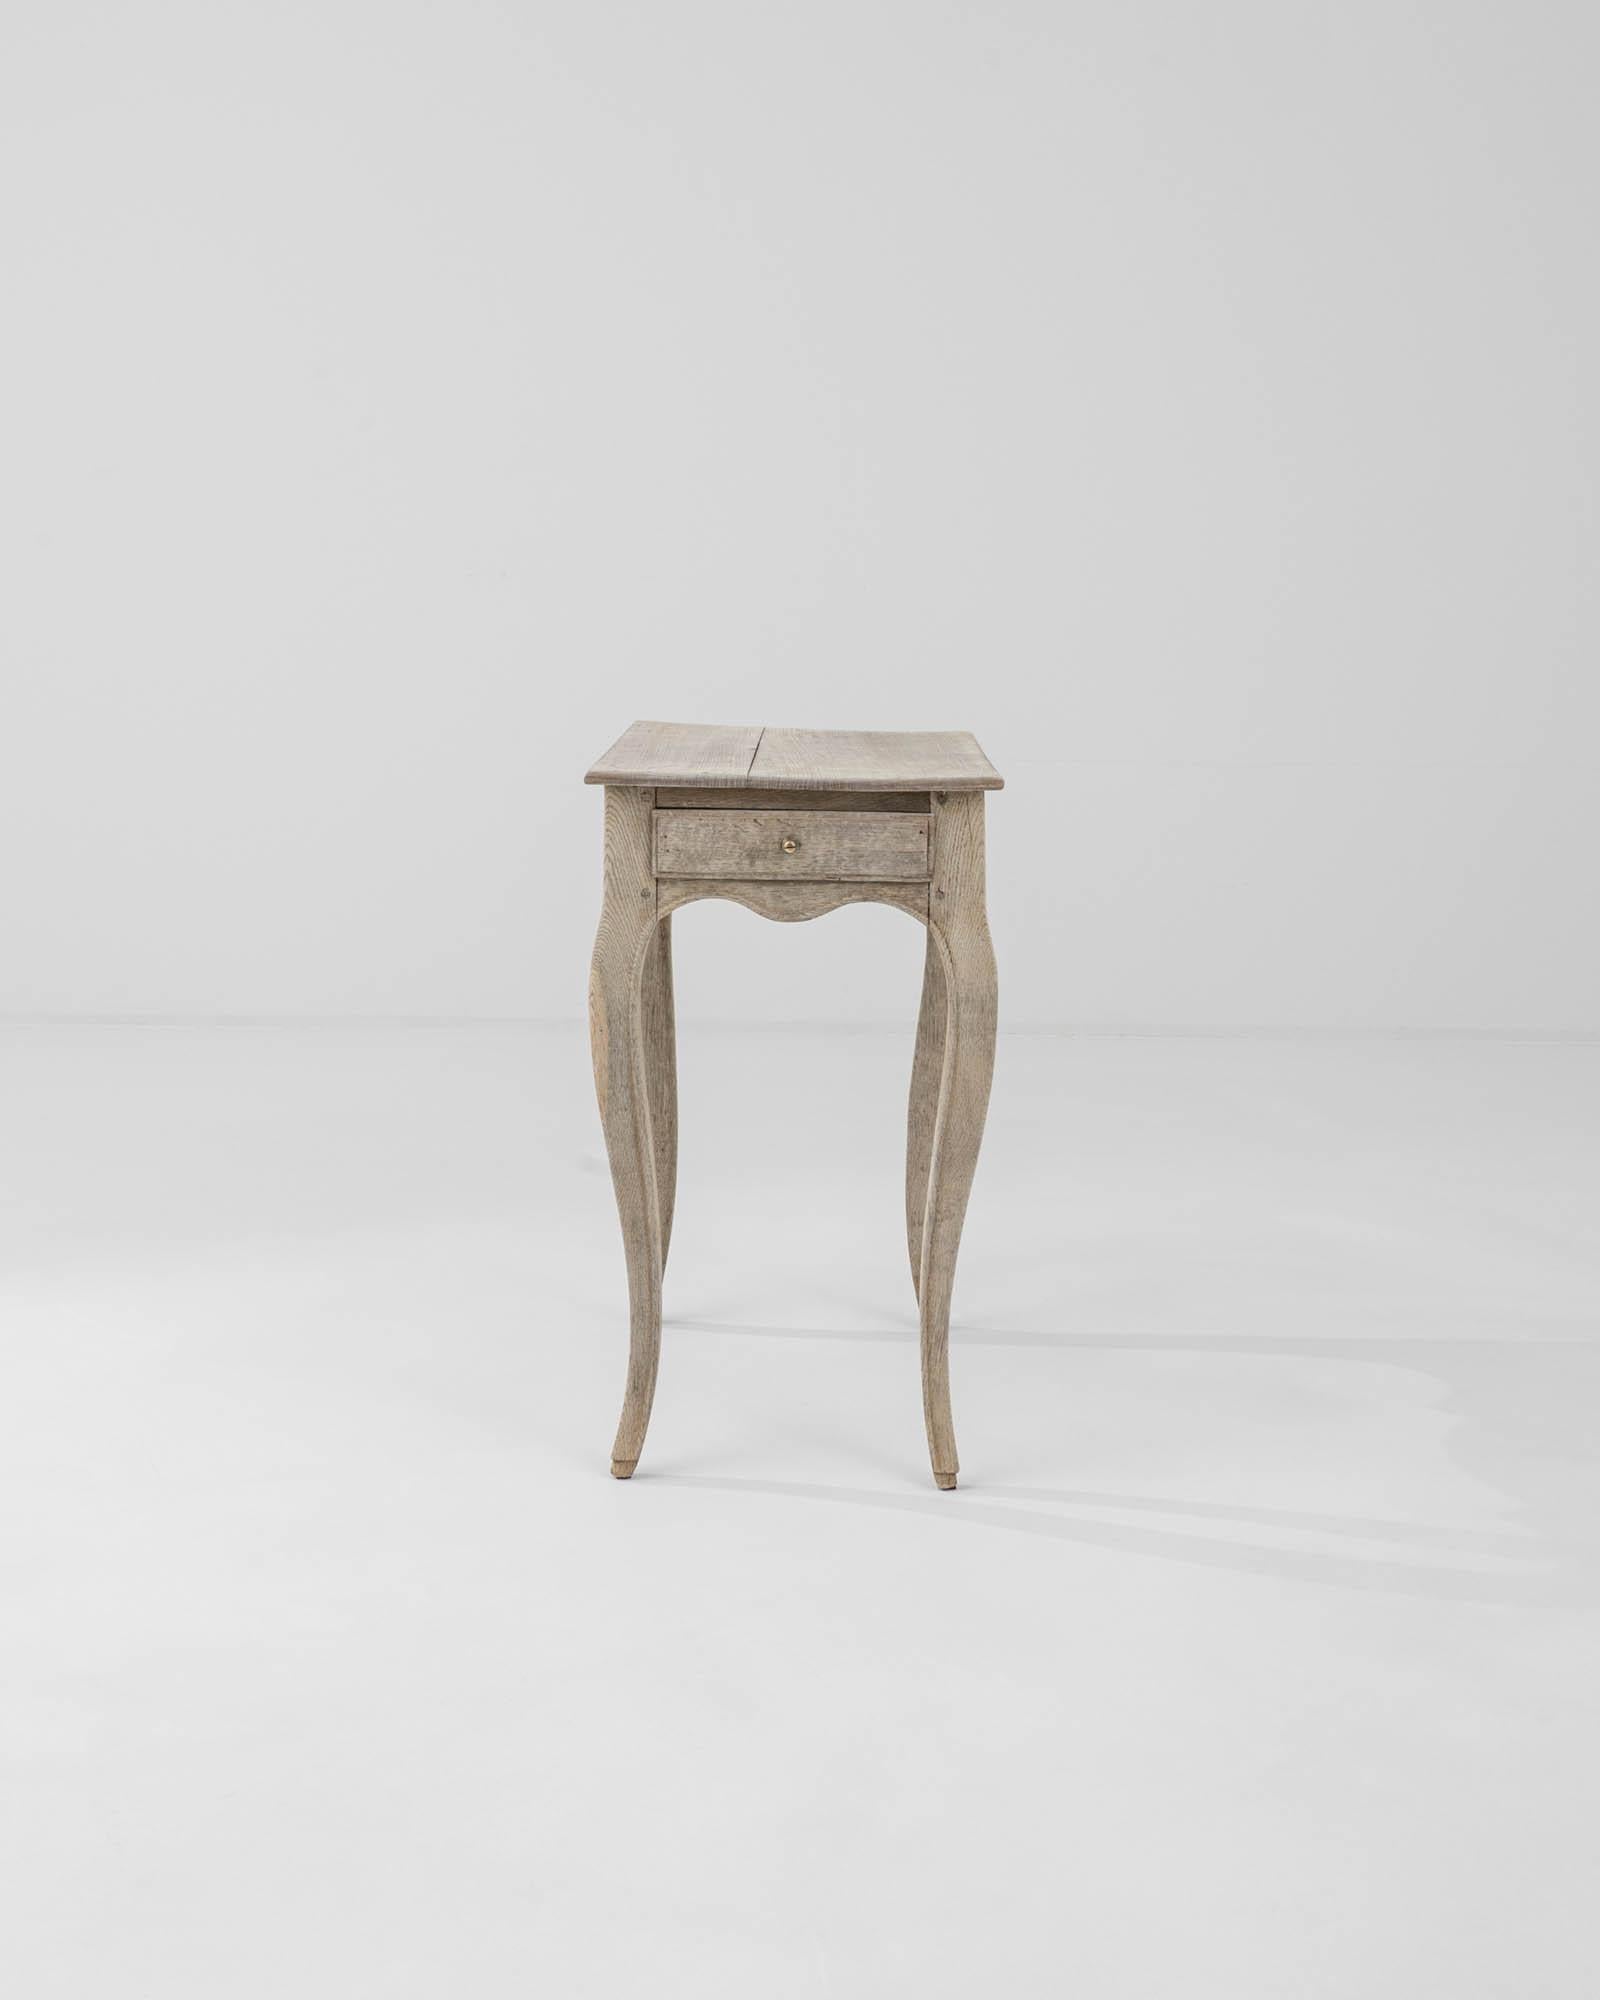 An antique bleached oak table from France with distinctive curved legs. Stylish and practical with a versatile shape, four limbs stretch to support the scalloped apron and a softly beveled tabletop. The piece imparts a playful figure – carved hooves